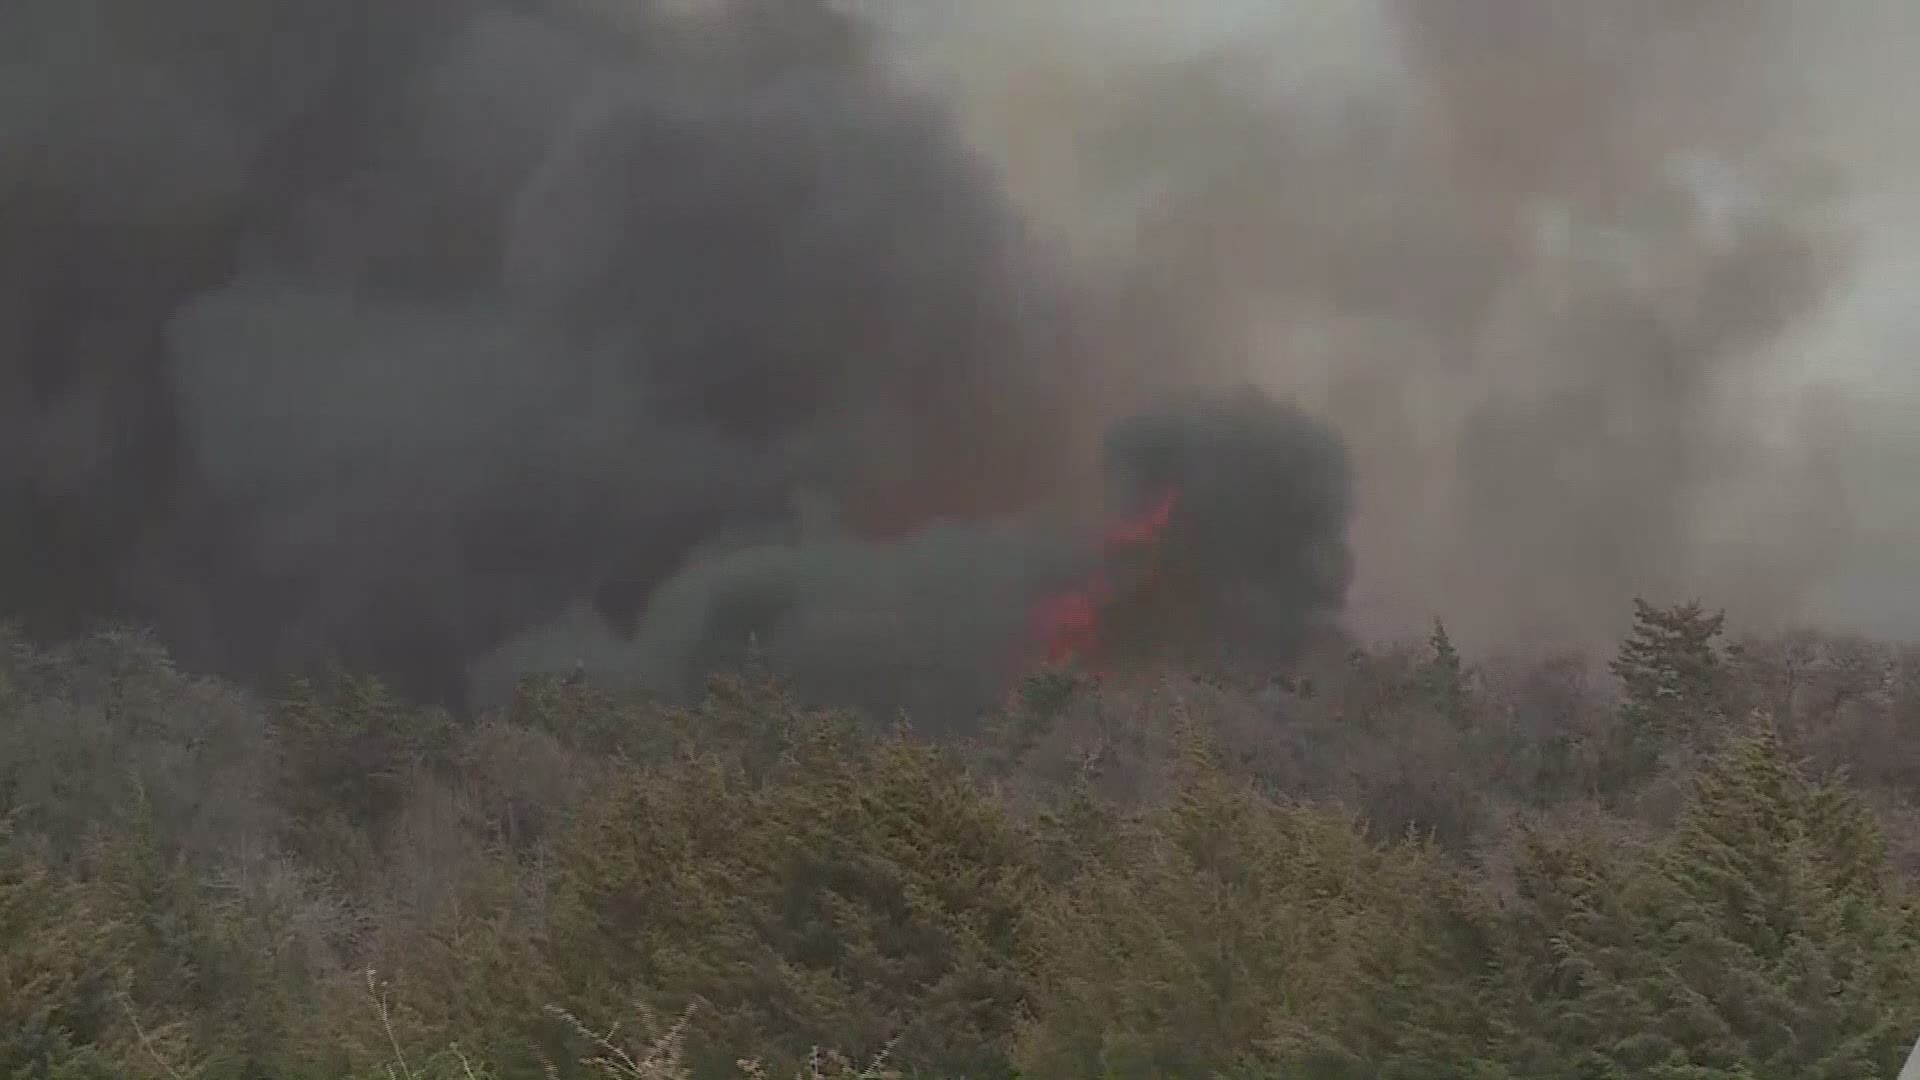 Multiple large fires are burning across Western Oklahoma, forcing evacuations in Dewey and surrounding counties. Video from near Seiling, OK. (Video: KFOR)